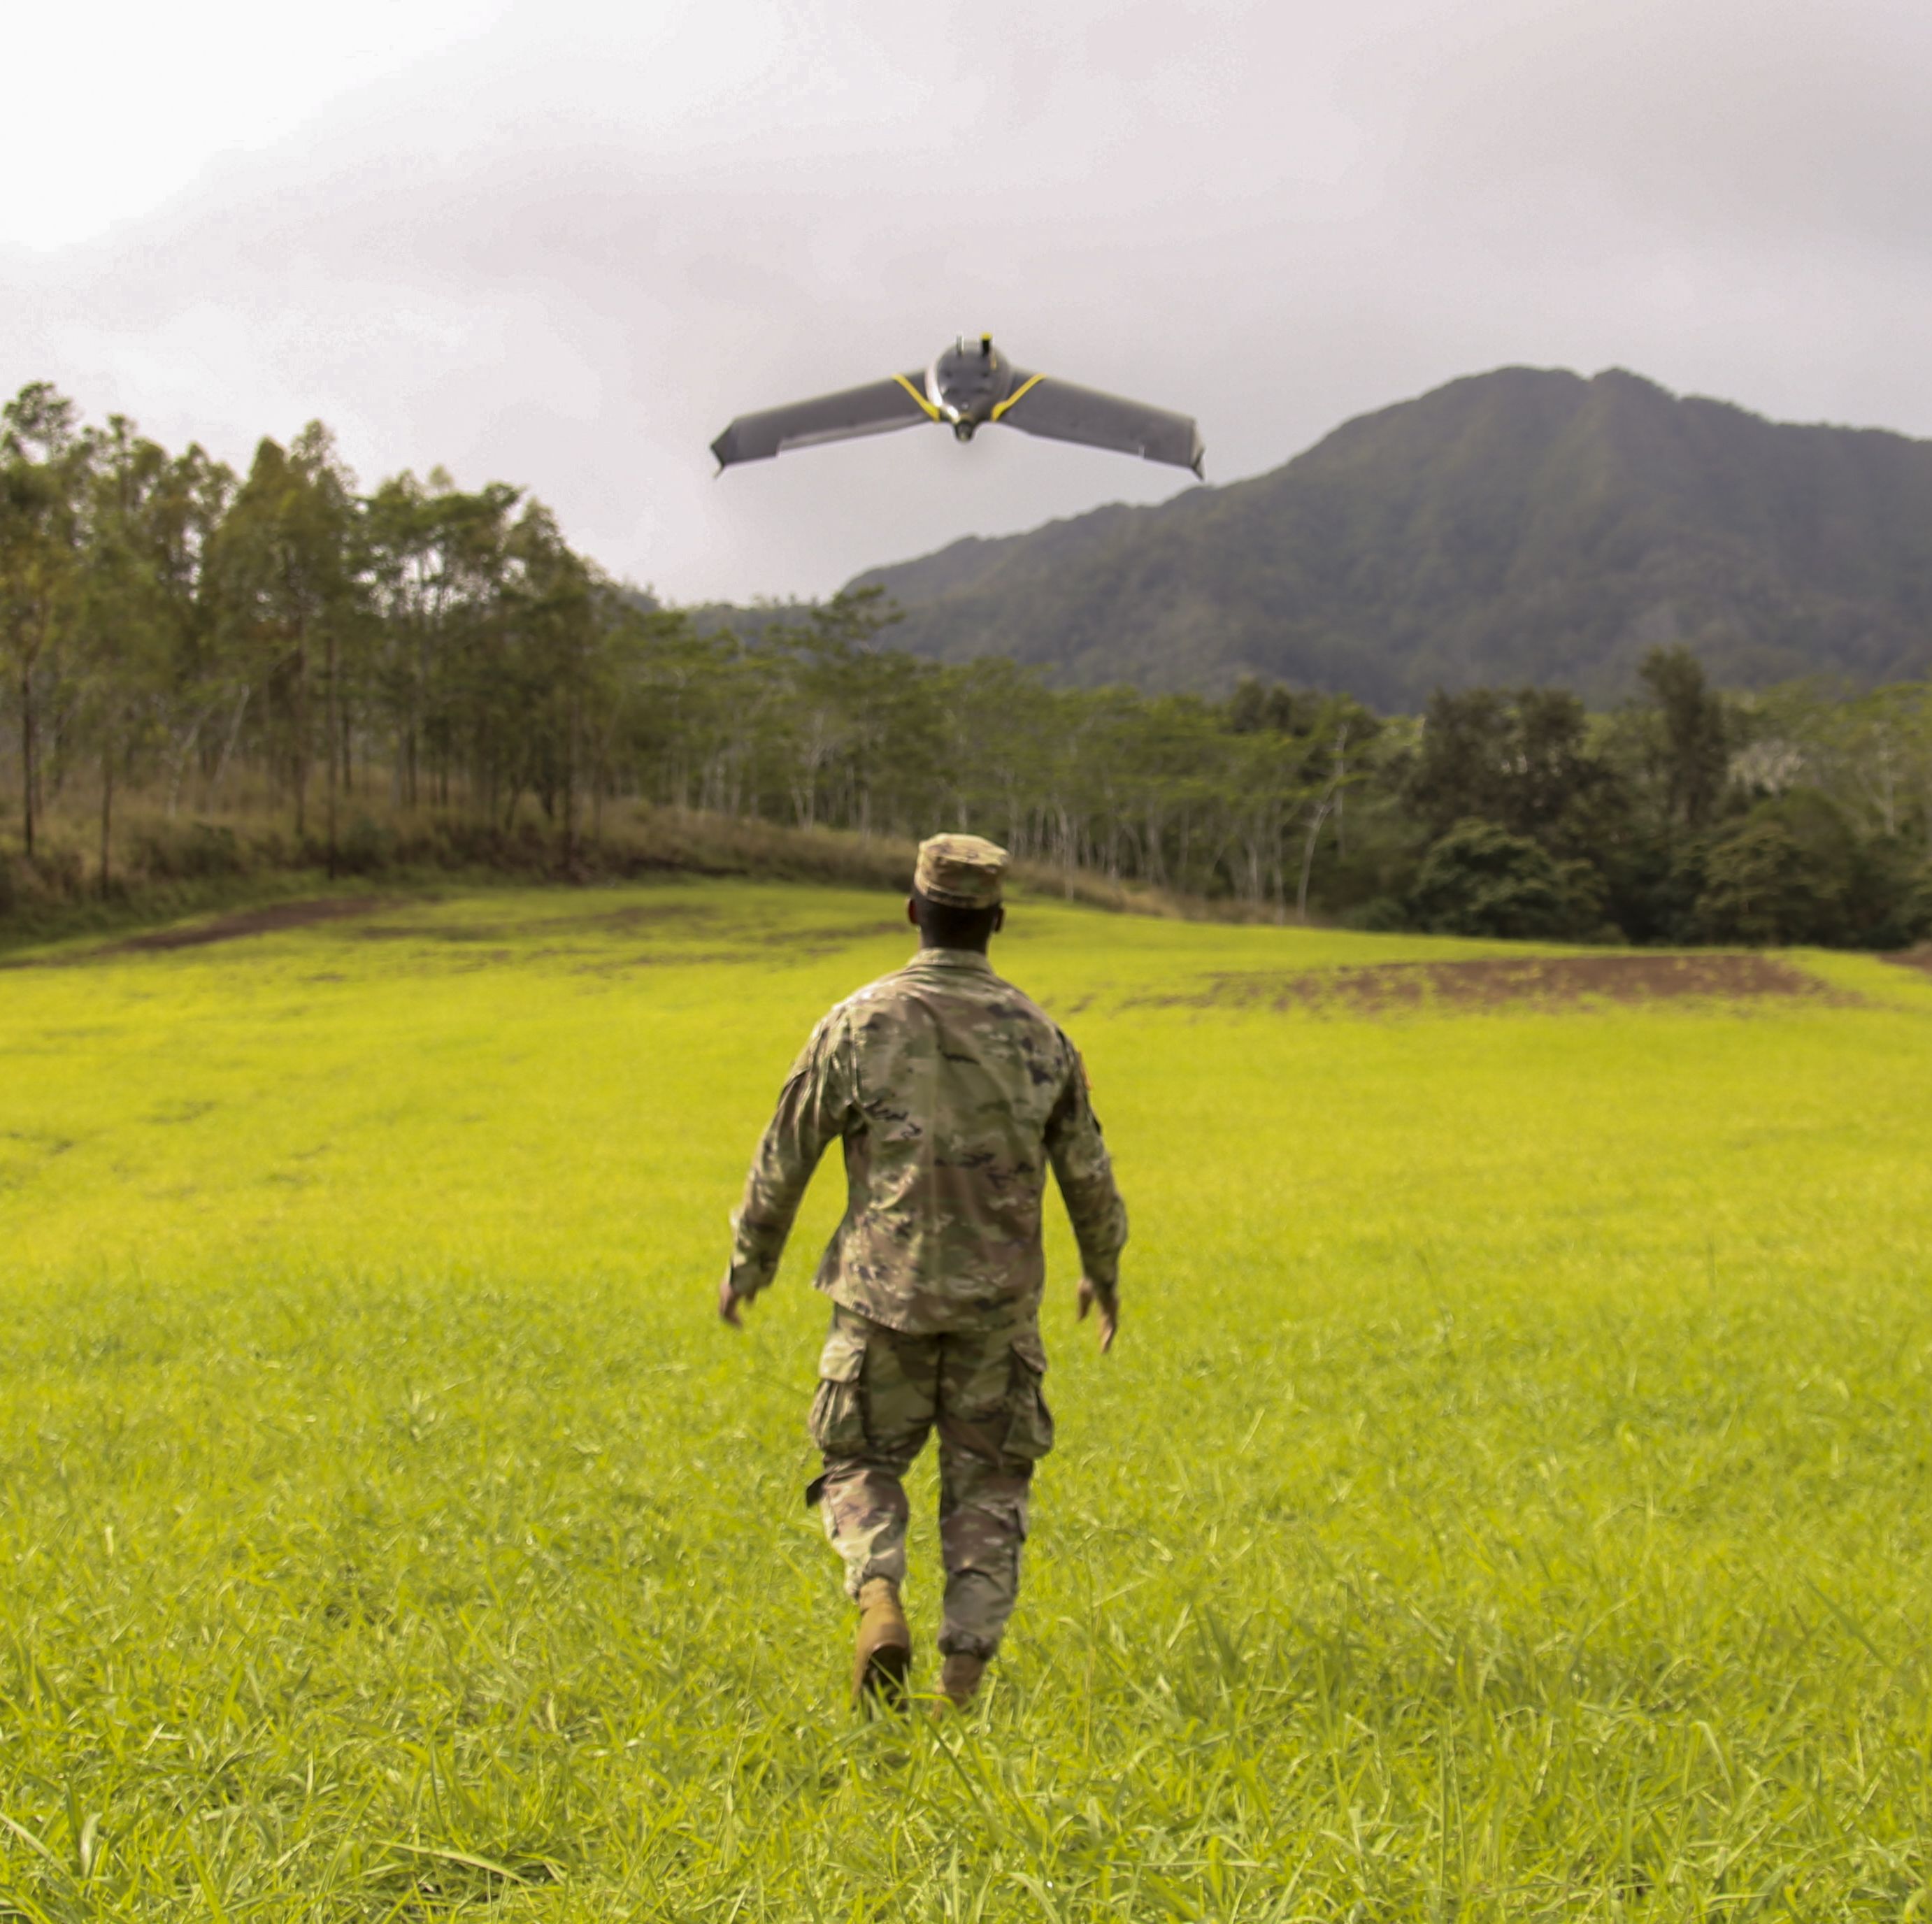 The U.S. Army Will Soon Get Explosive Reconnaissance Drones